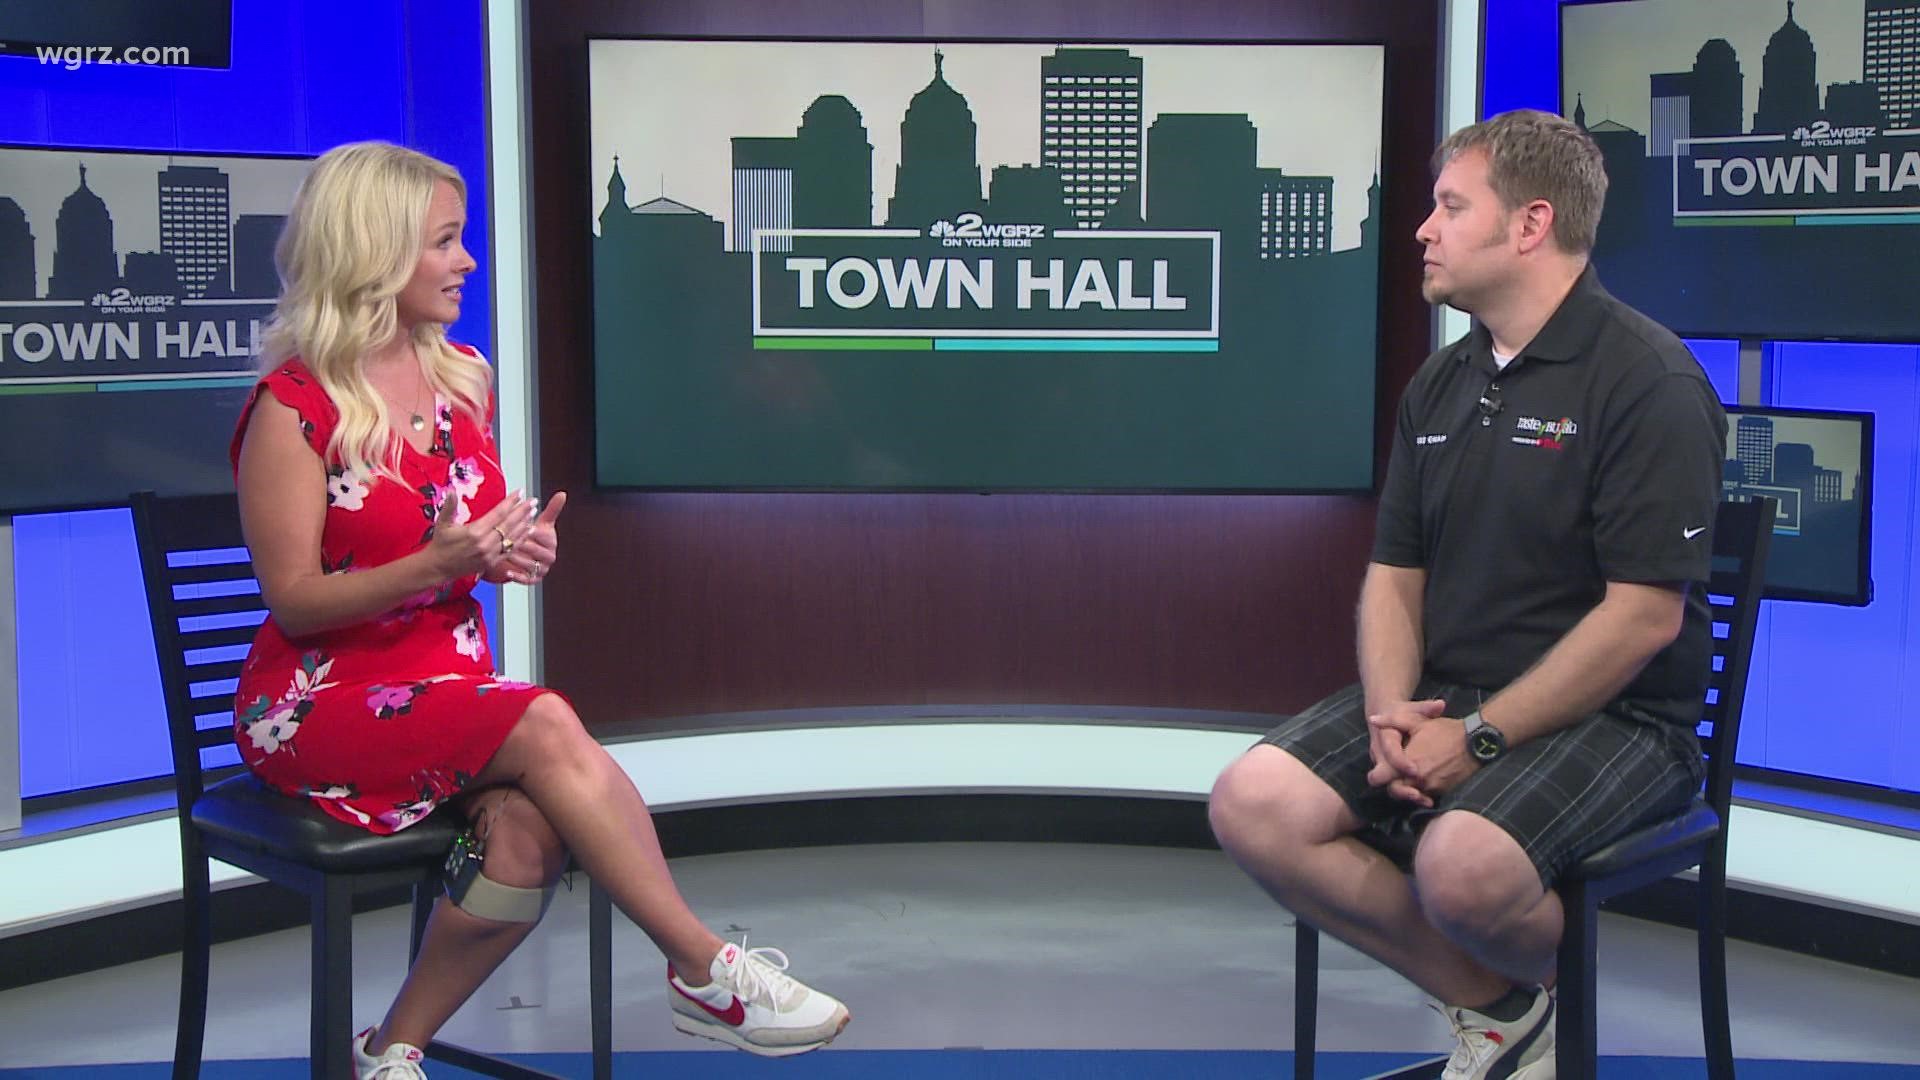 Luke Baecker, the chair of the 39th annual Taste of Buffalo, joined the 2 On Your Side Town Hall to discuss what people can expect this weekend at Niagara Square.